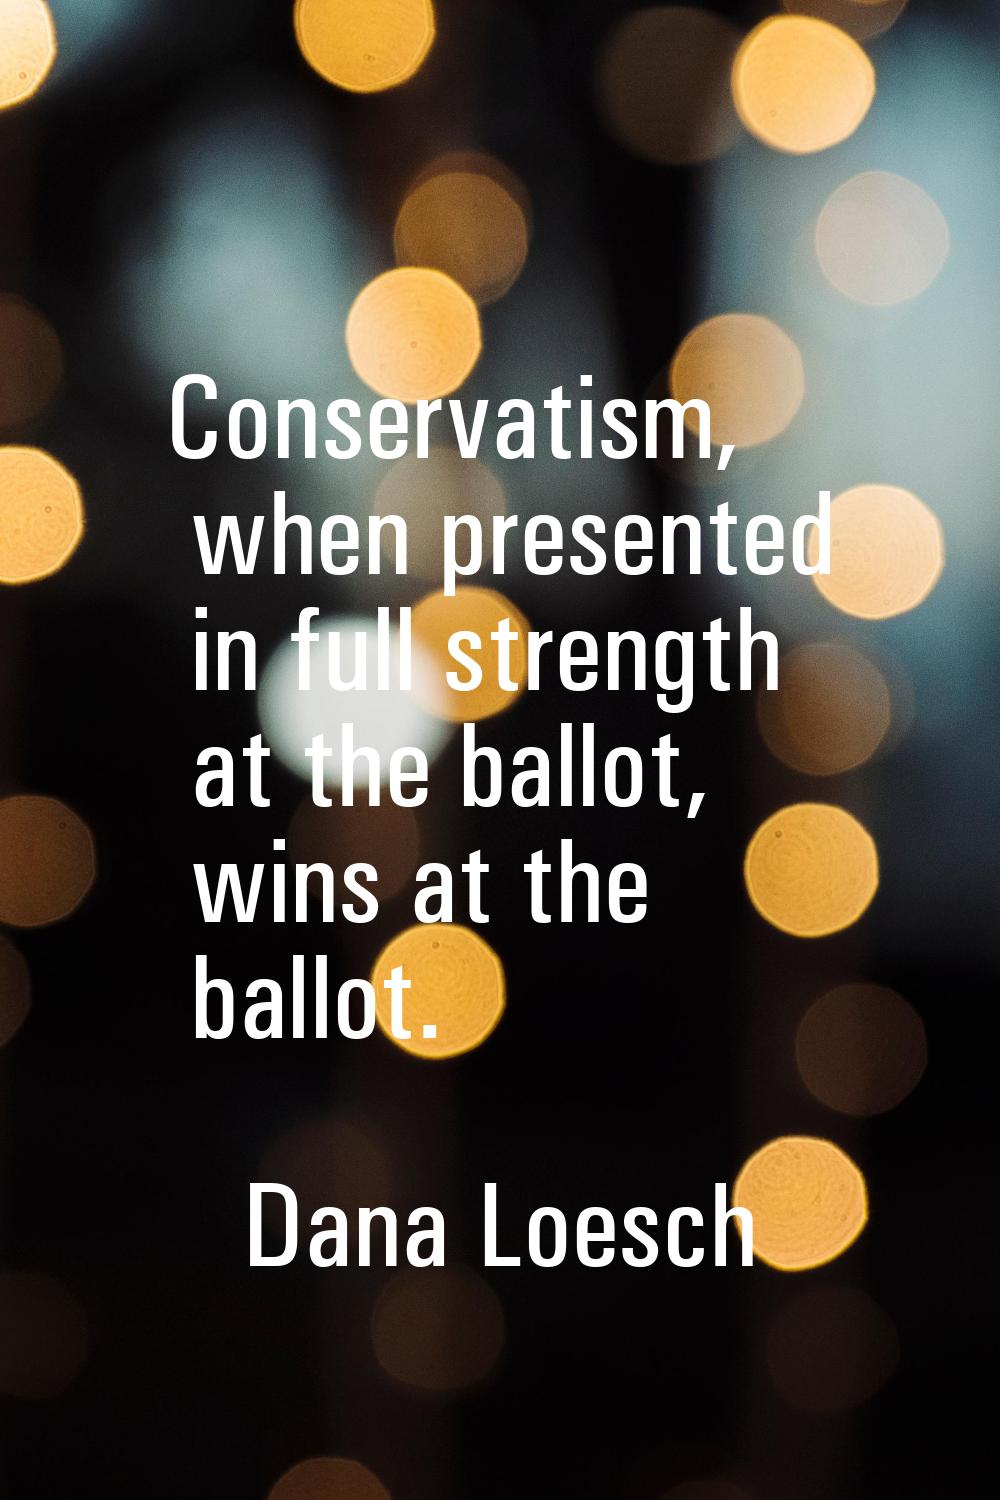 Conservatism, when presented in full strength at the ballot, wins at the ballot.